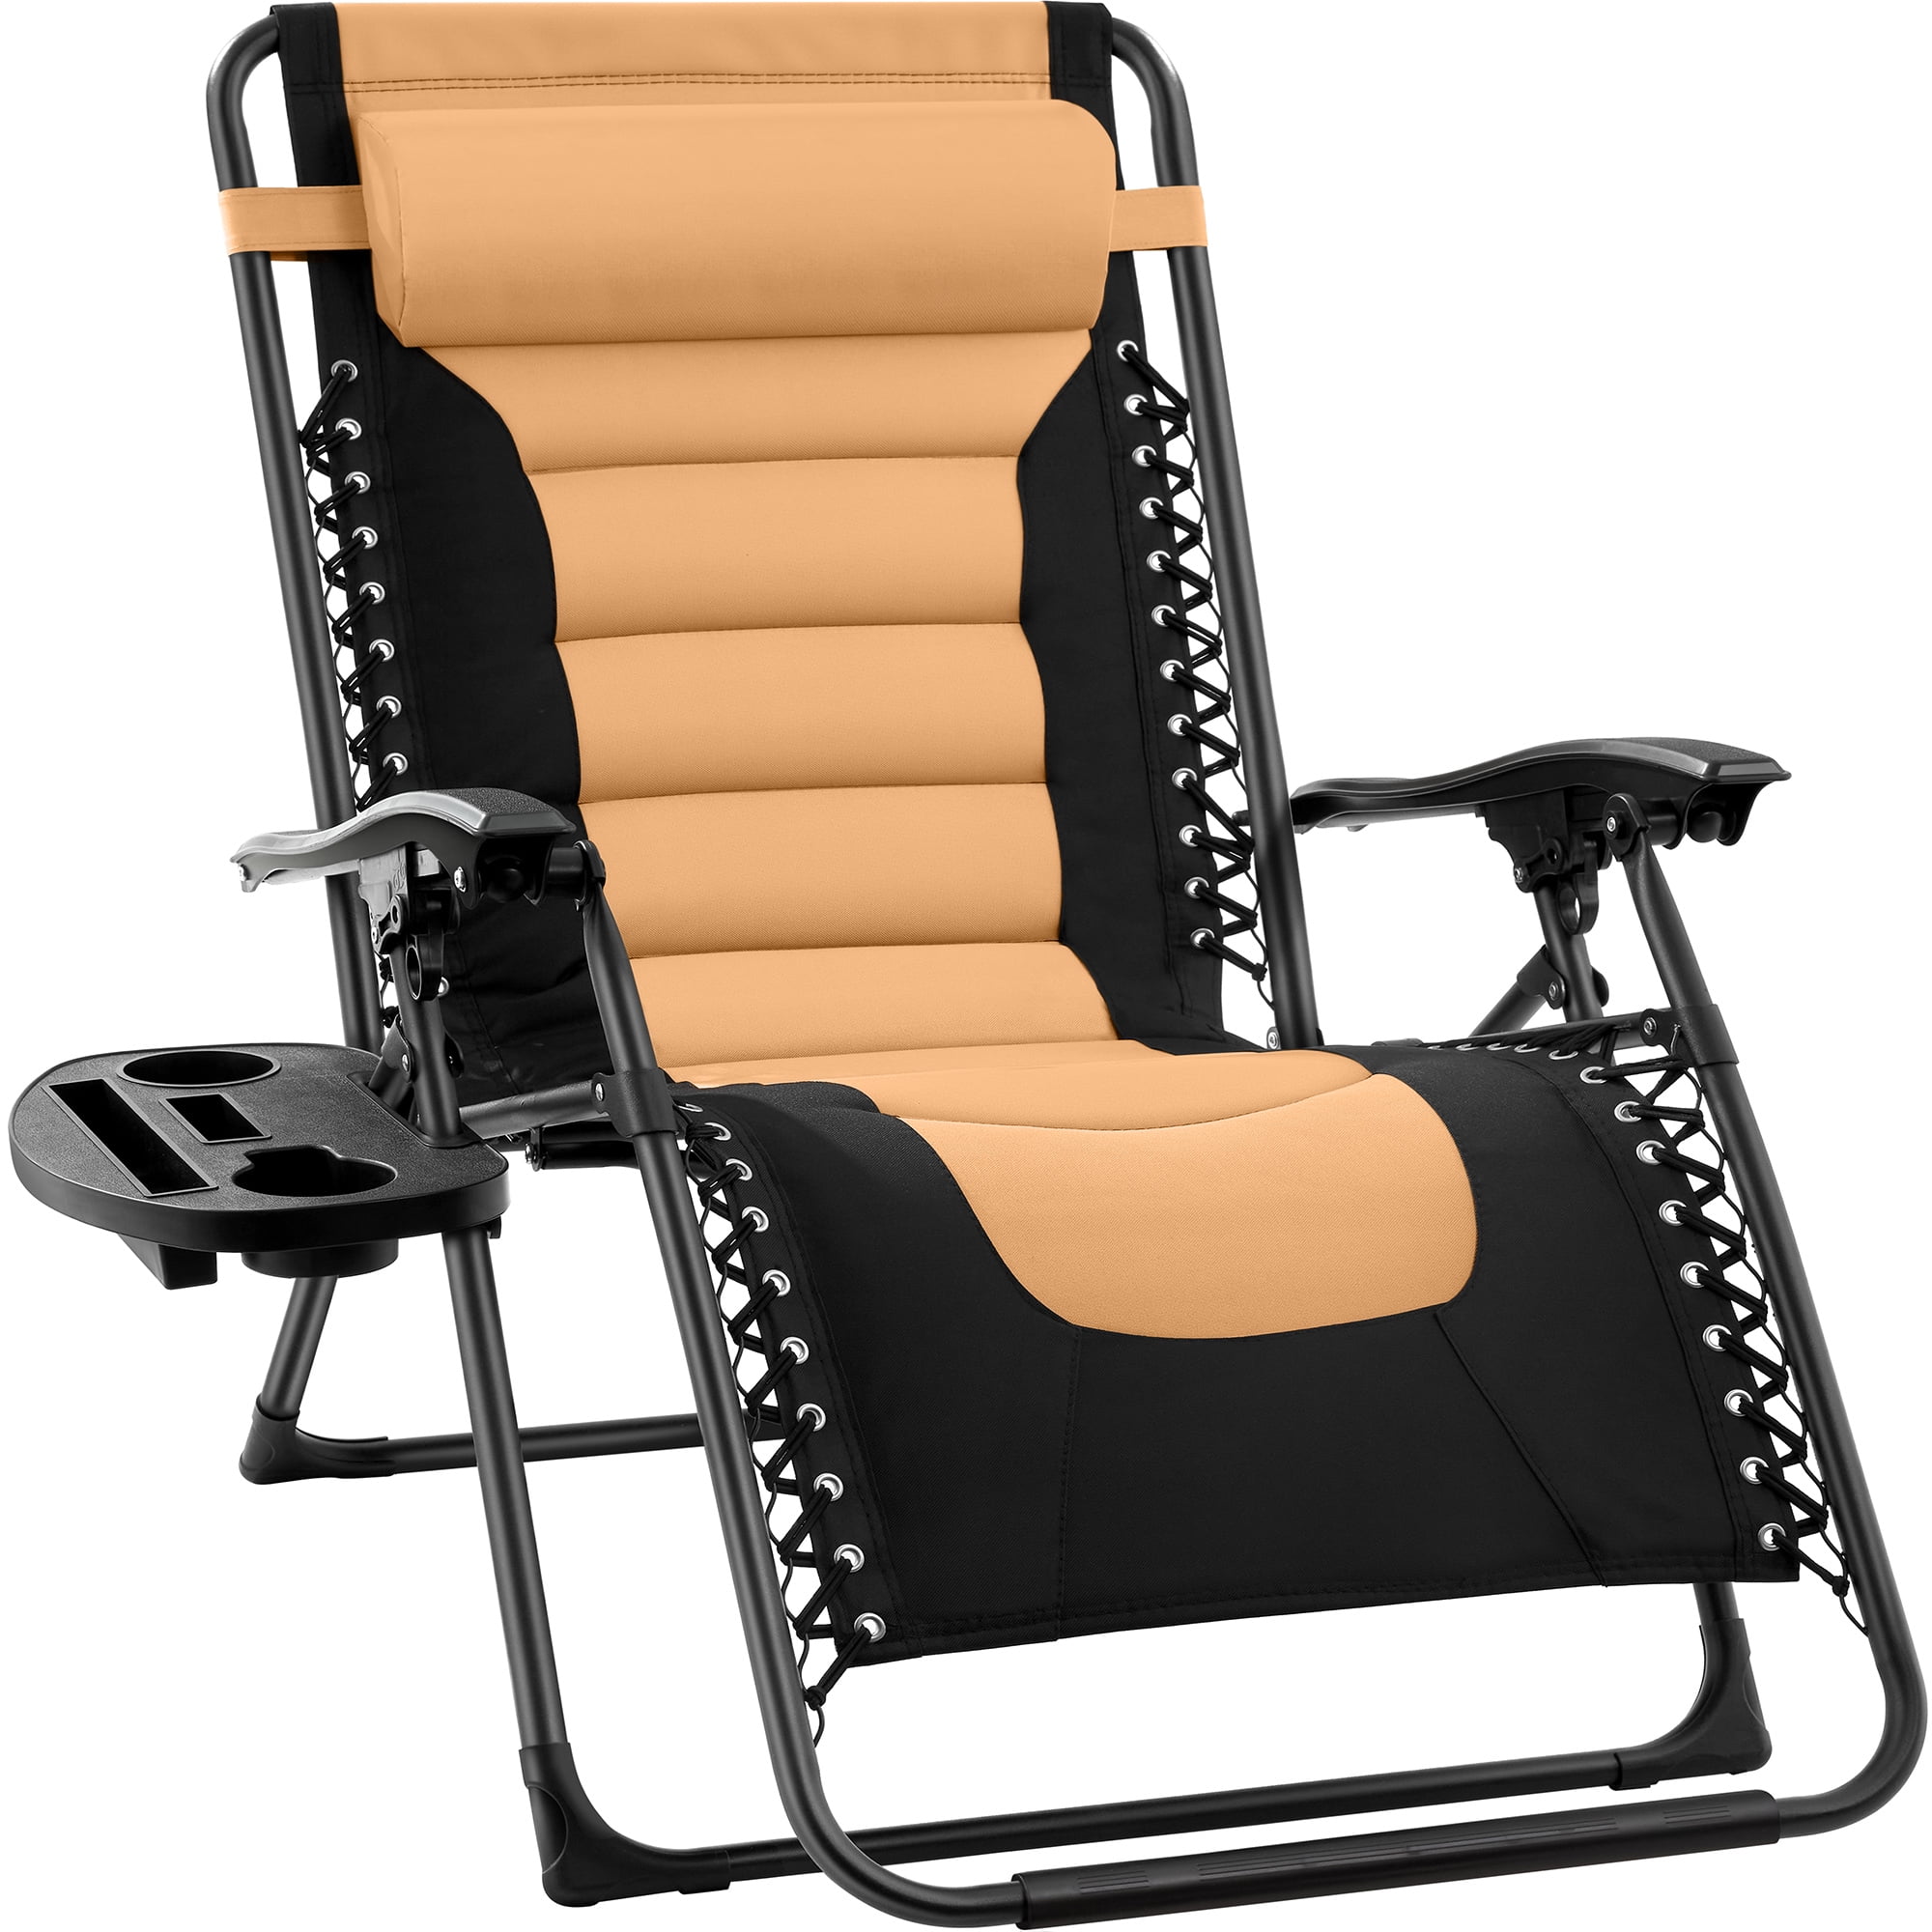  The Original Zero Gravity Chair Cushion for Foot Rest